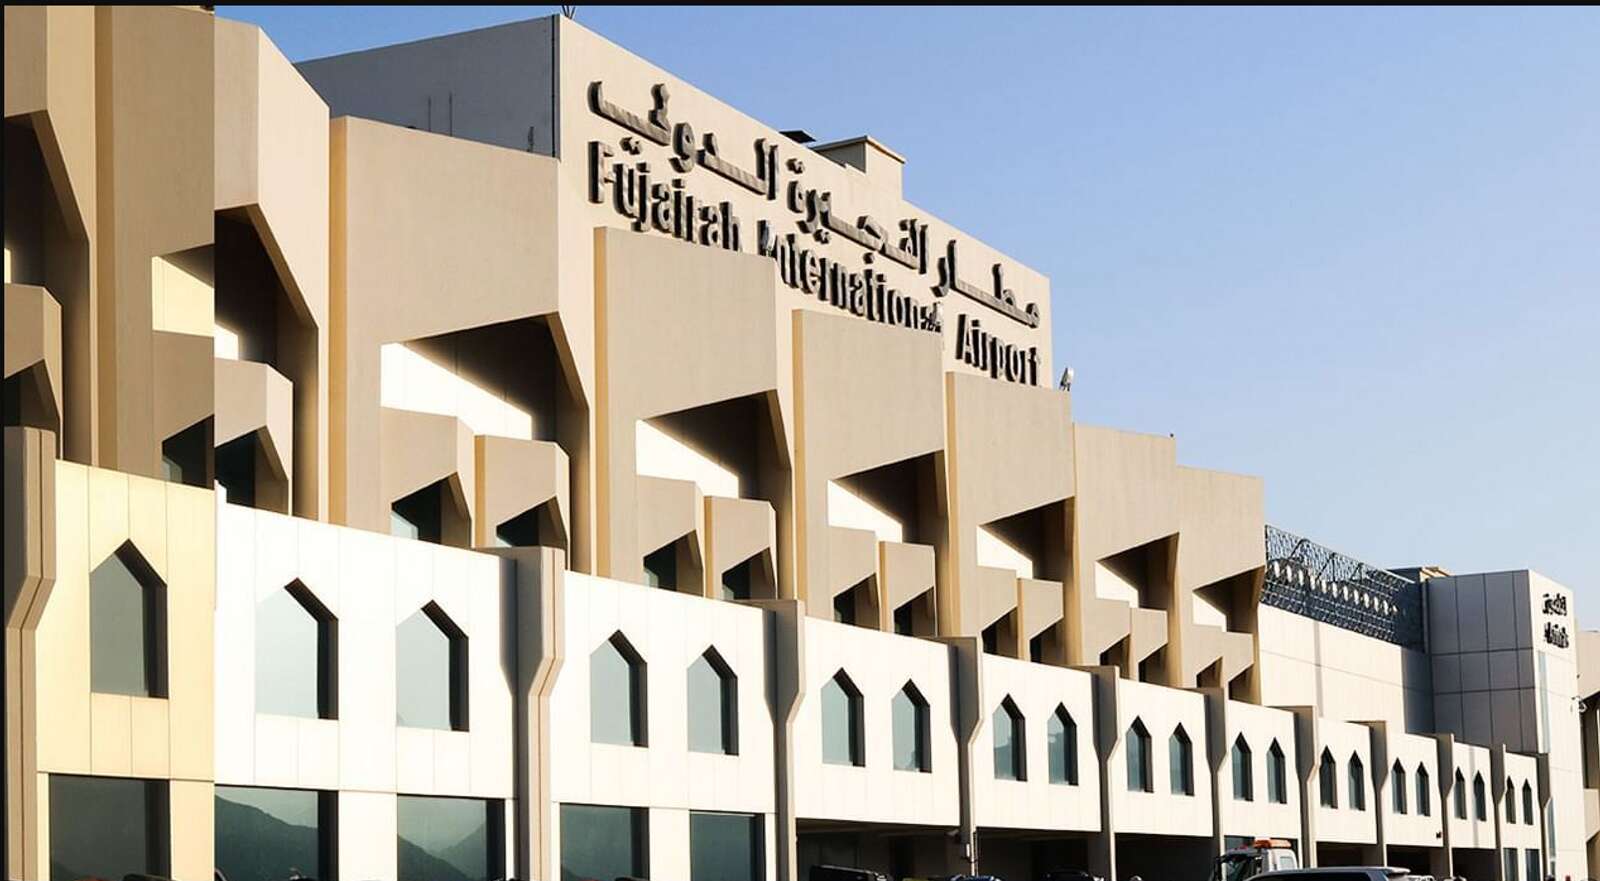 daily flights, 15 minutes for immigration: fujairah airport to expand